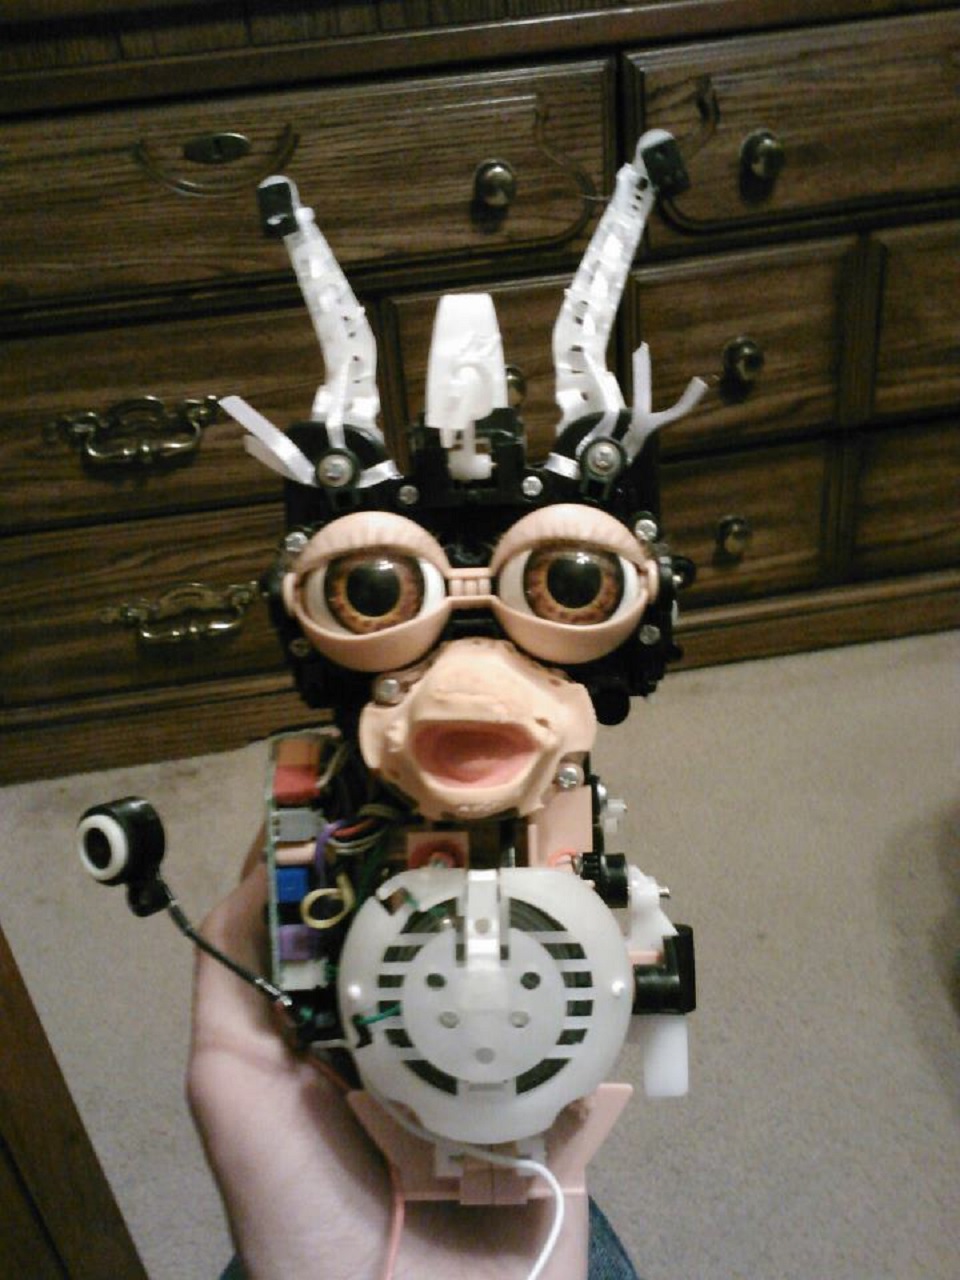 Ever Wonder What A Furby Looks Like Without Its Fur? Now You Know